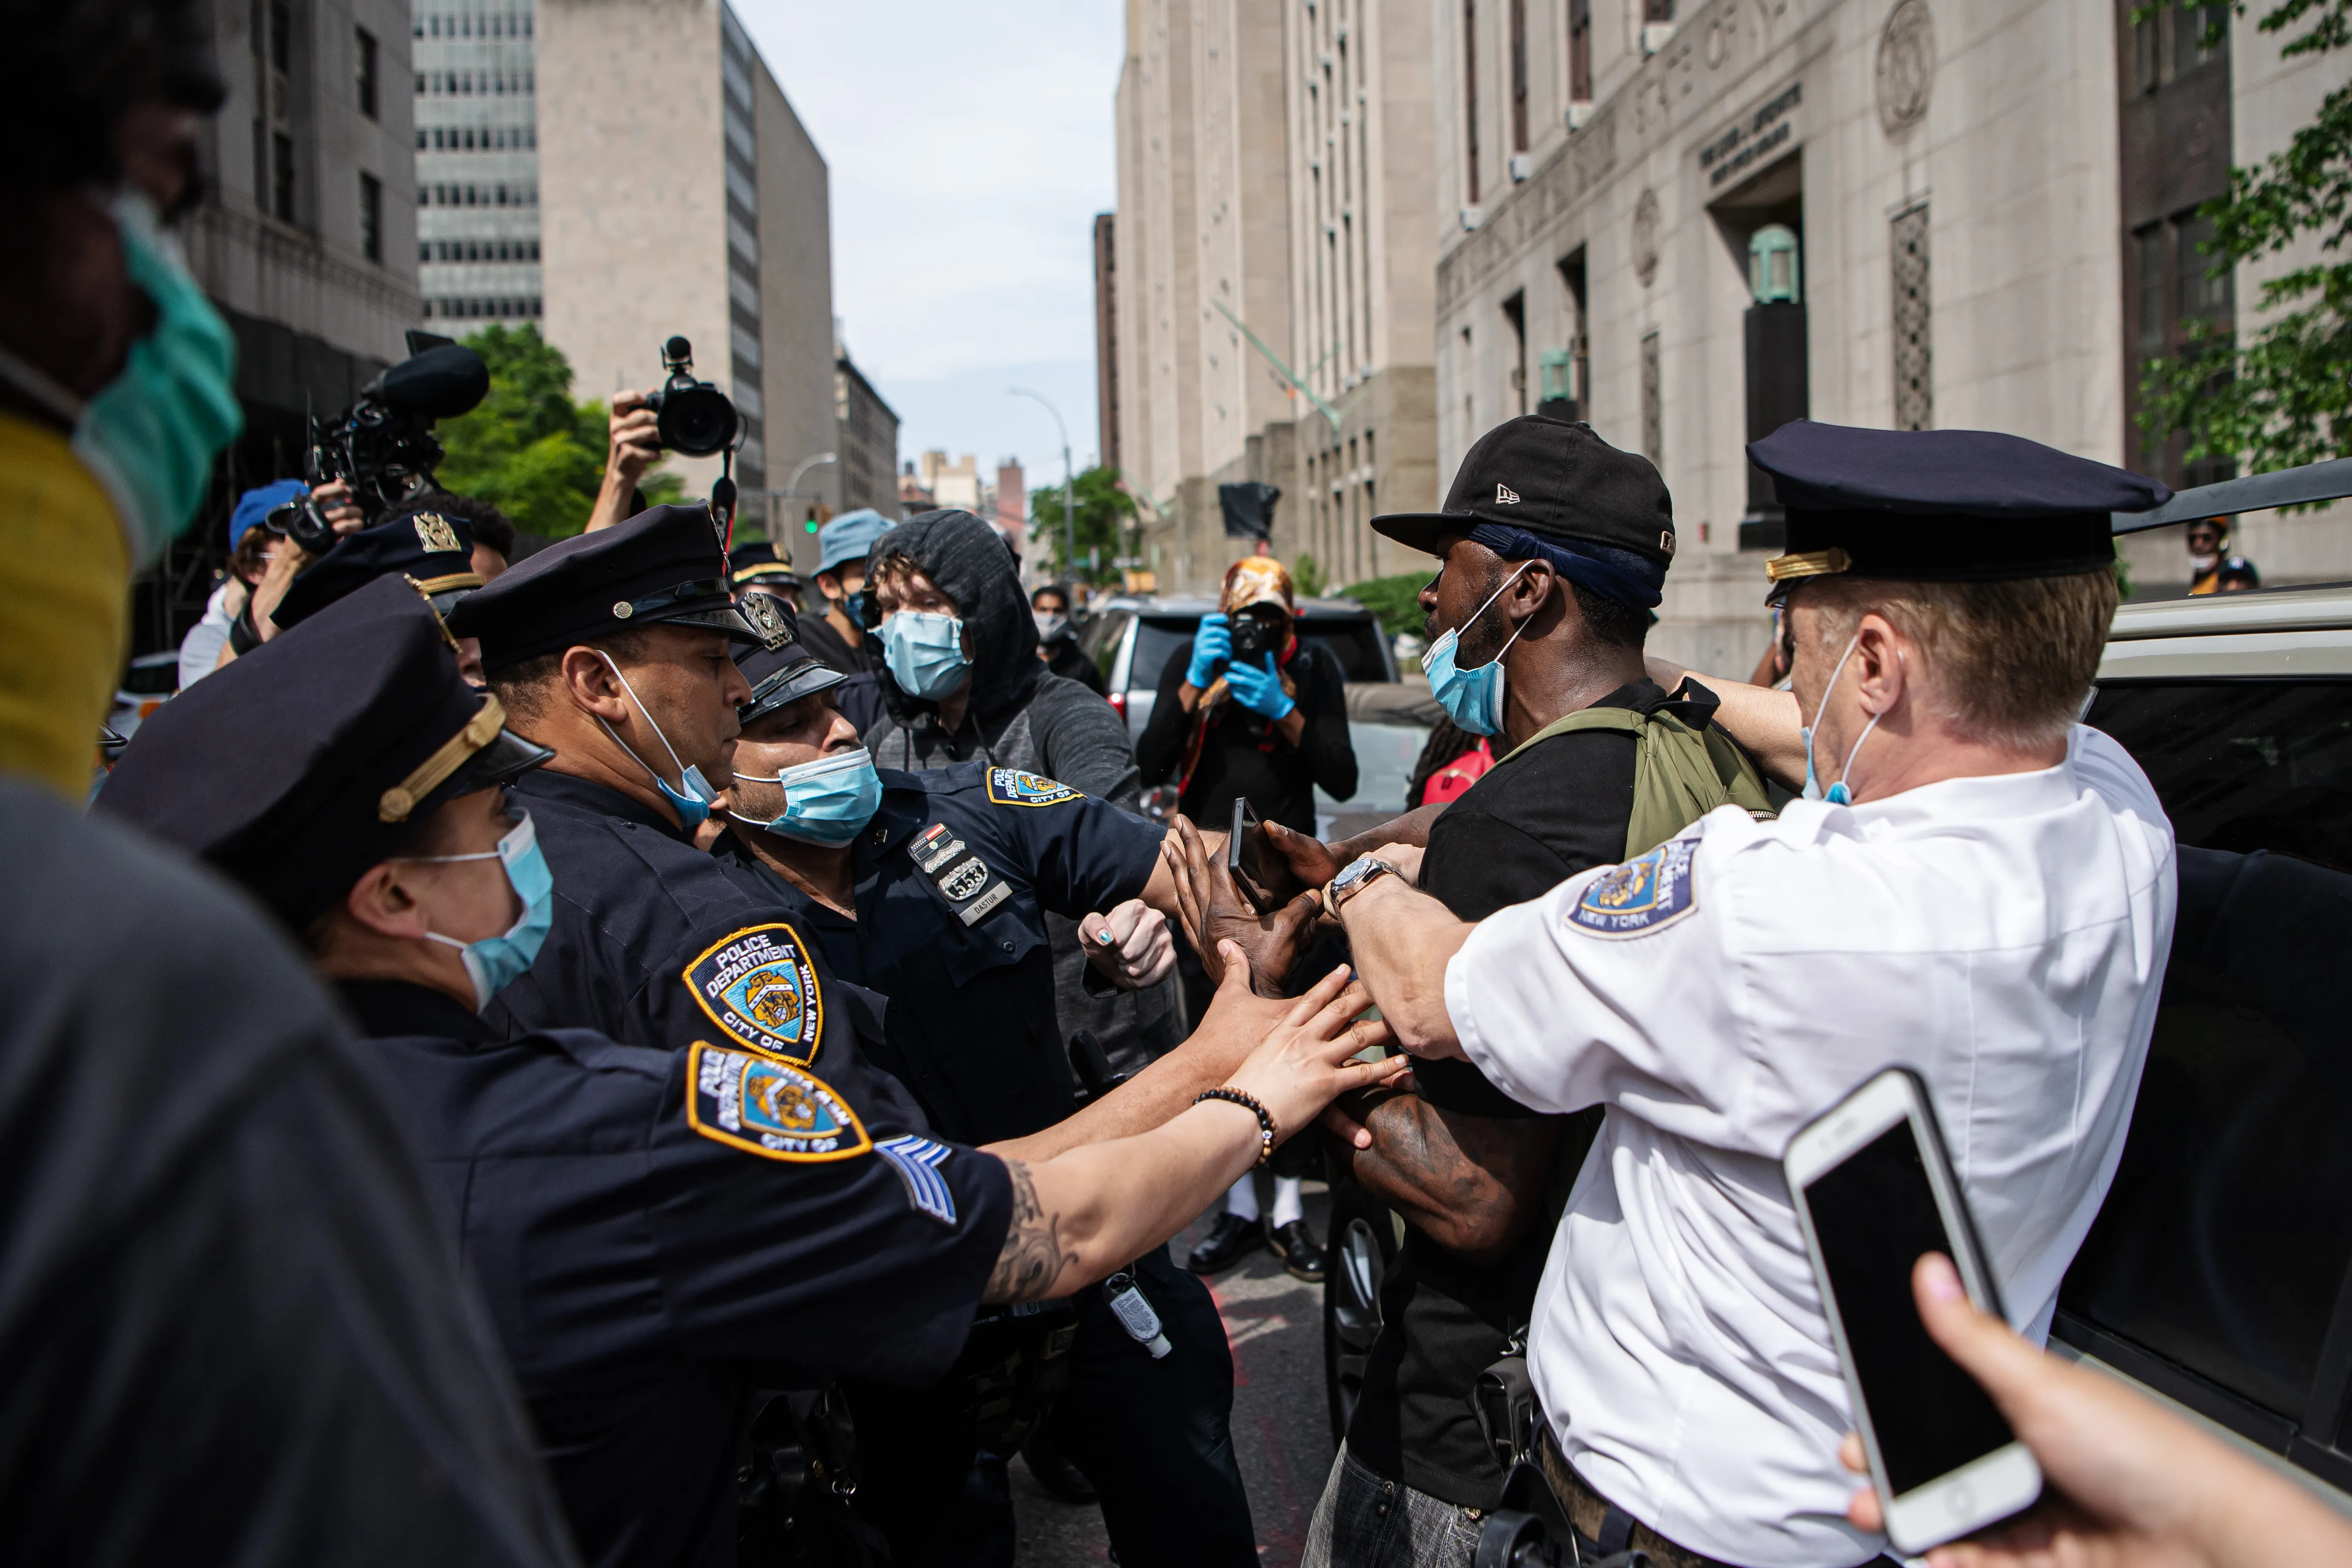 Why police department insurances are the key to progress on police reform